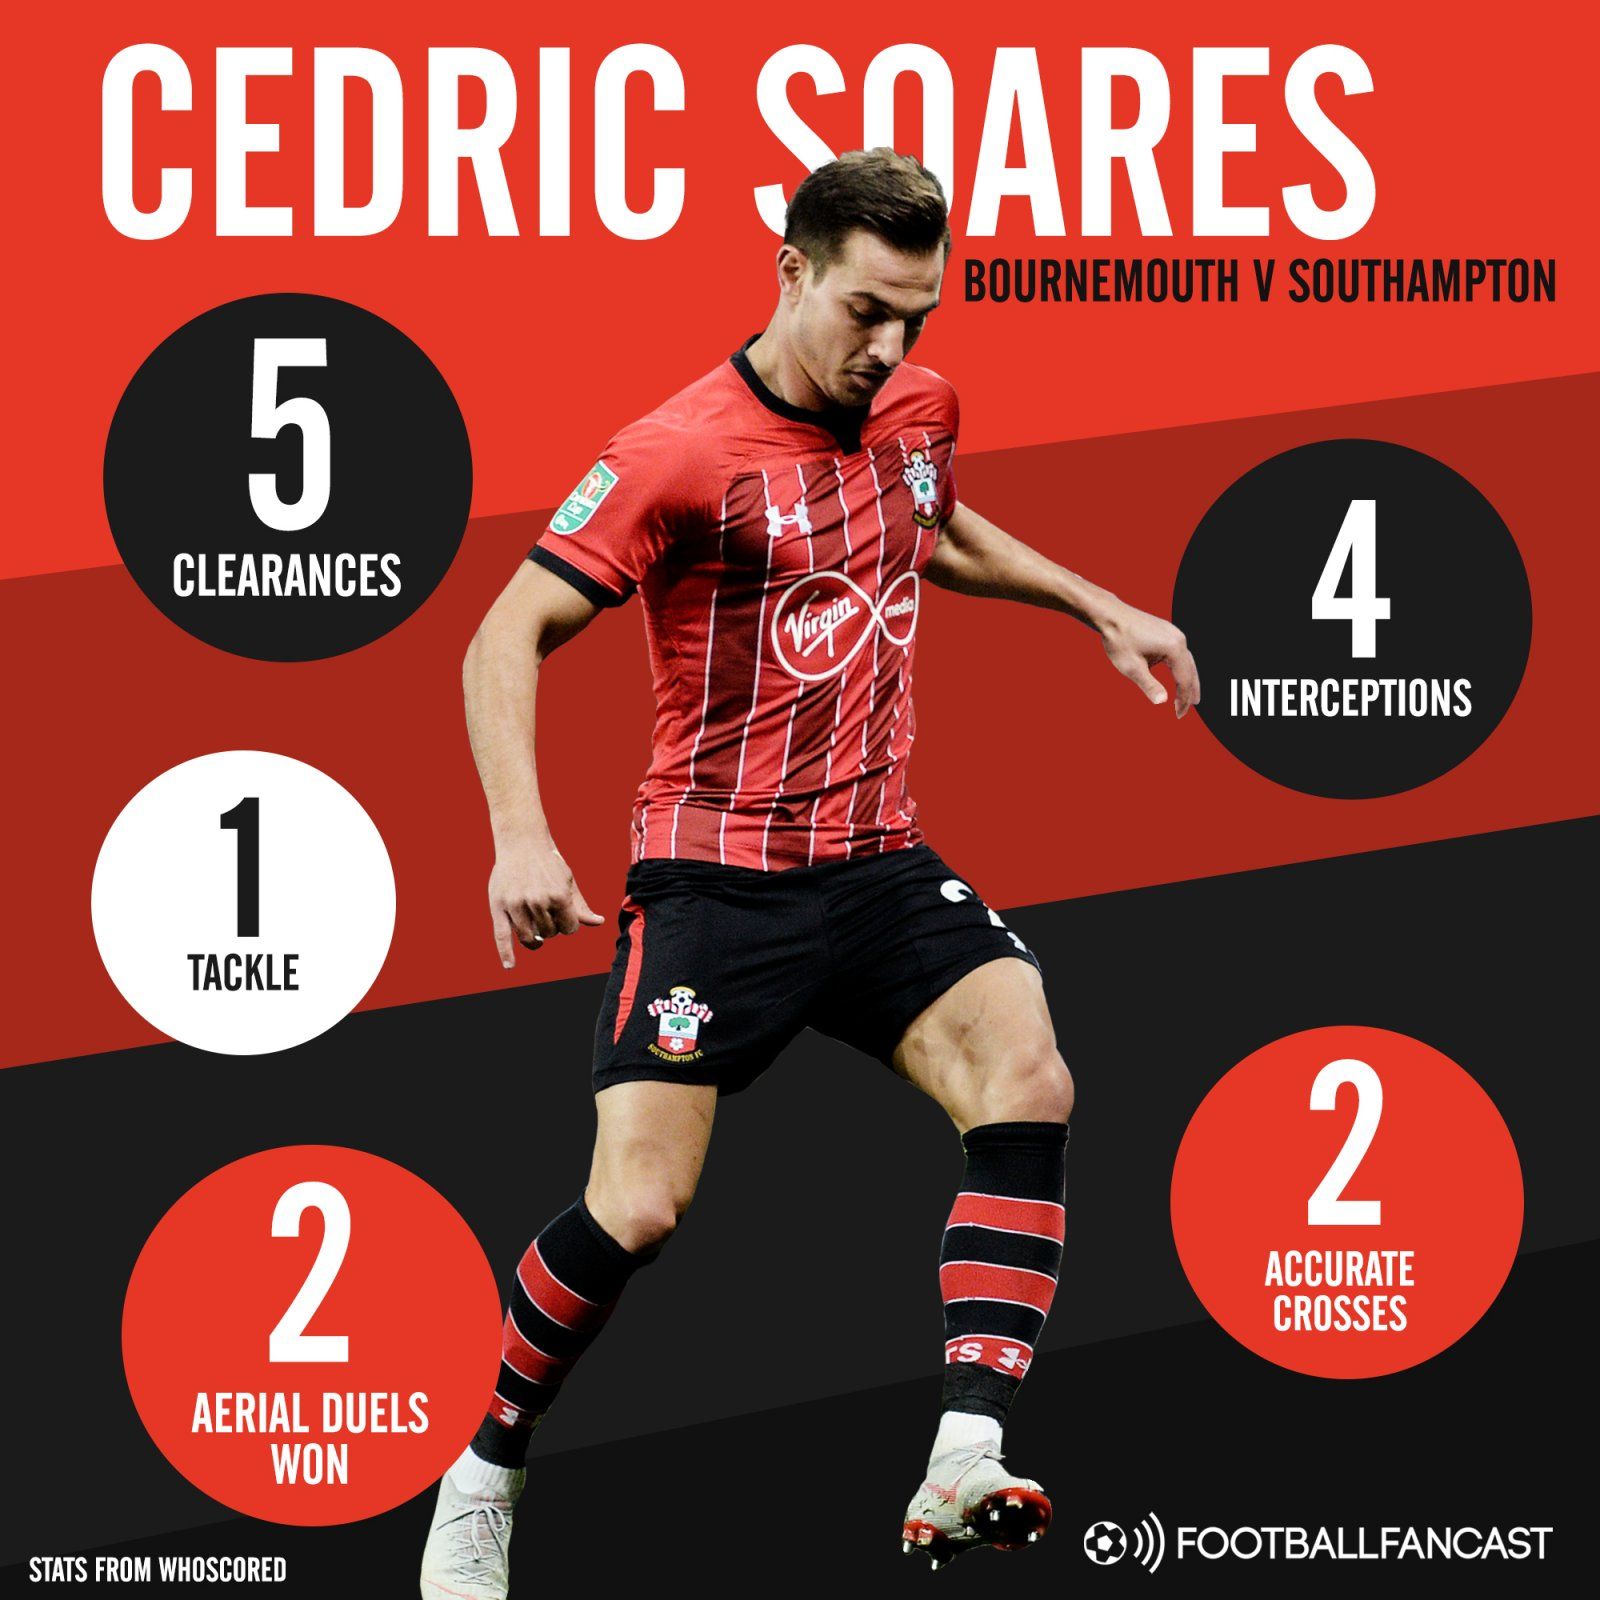 Southampton right-back Cedric Soares' stats in draw with Bournemouth